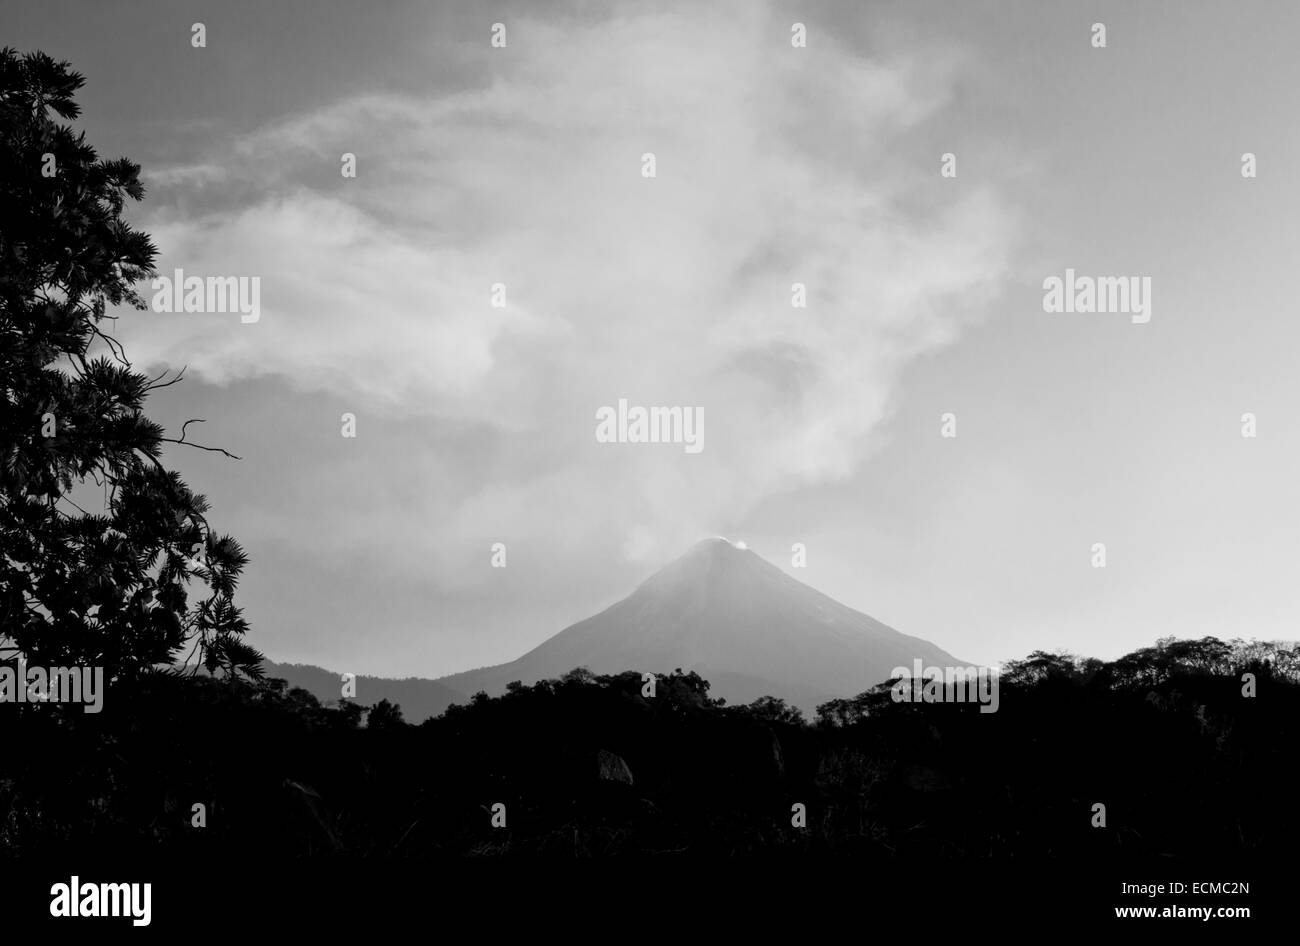 Gas cloud or plume erupting from Volcan El Feugo/ de Colima a  volcano in Mexico seen during the early morning Stock Photo